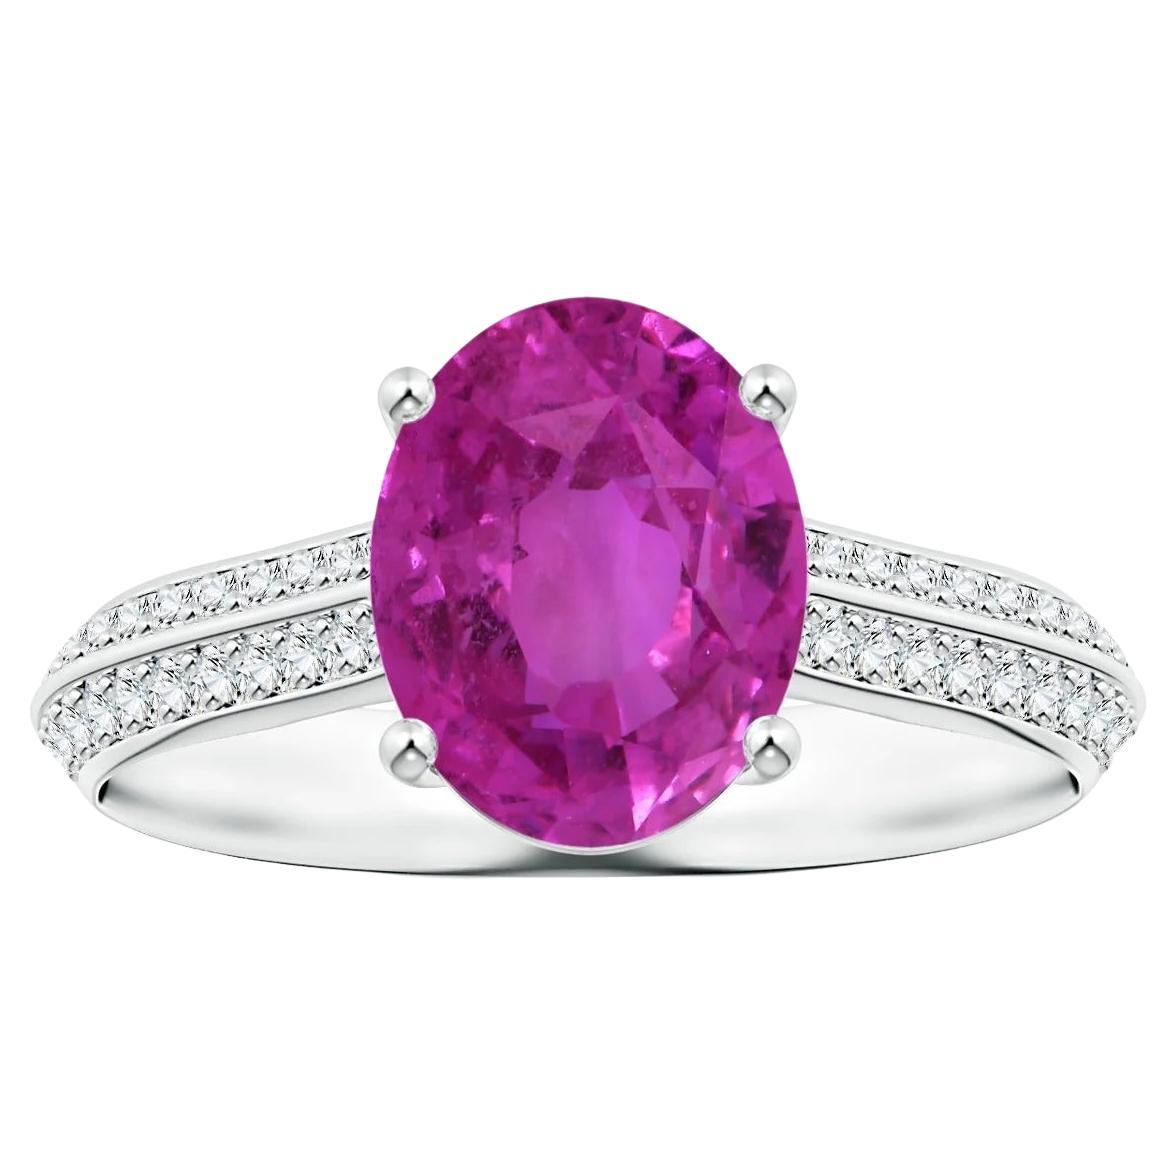 For Sale:  Angara Gia Certified Pink Sapphire Knife Edge Ring in White Gold with Diamonds